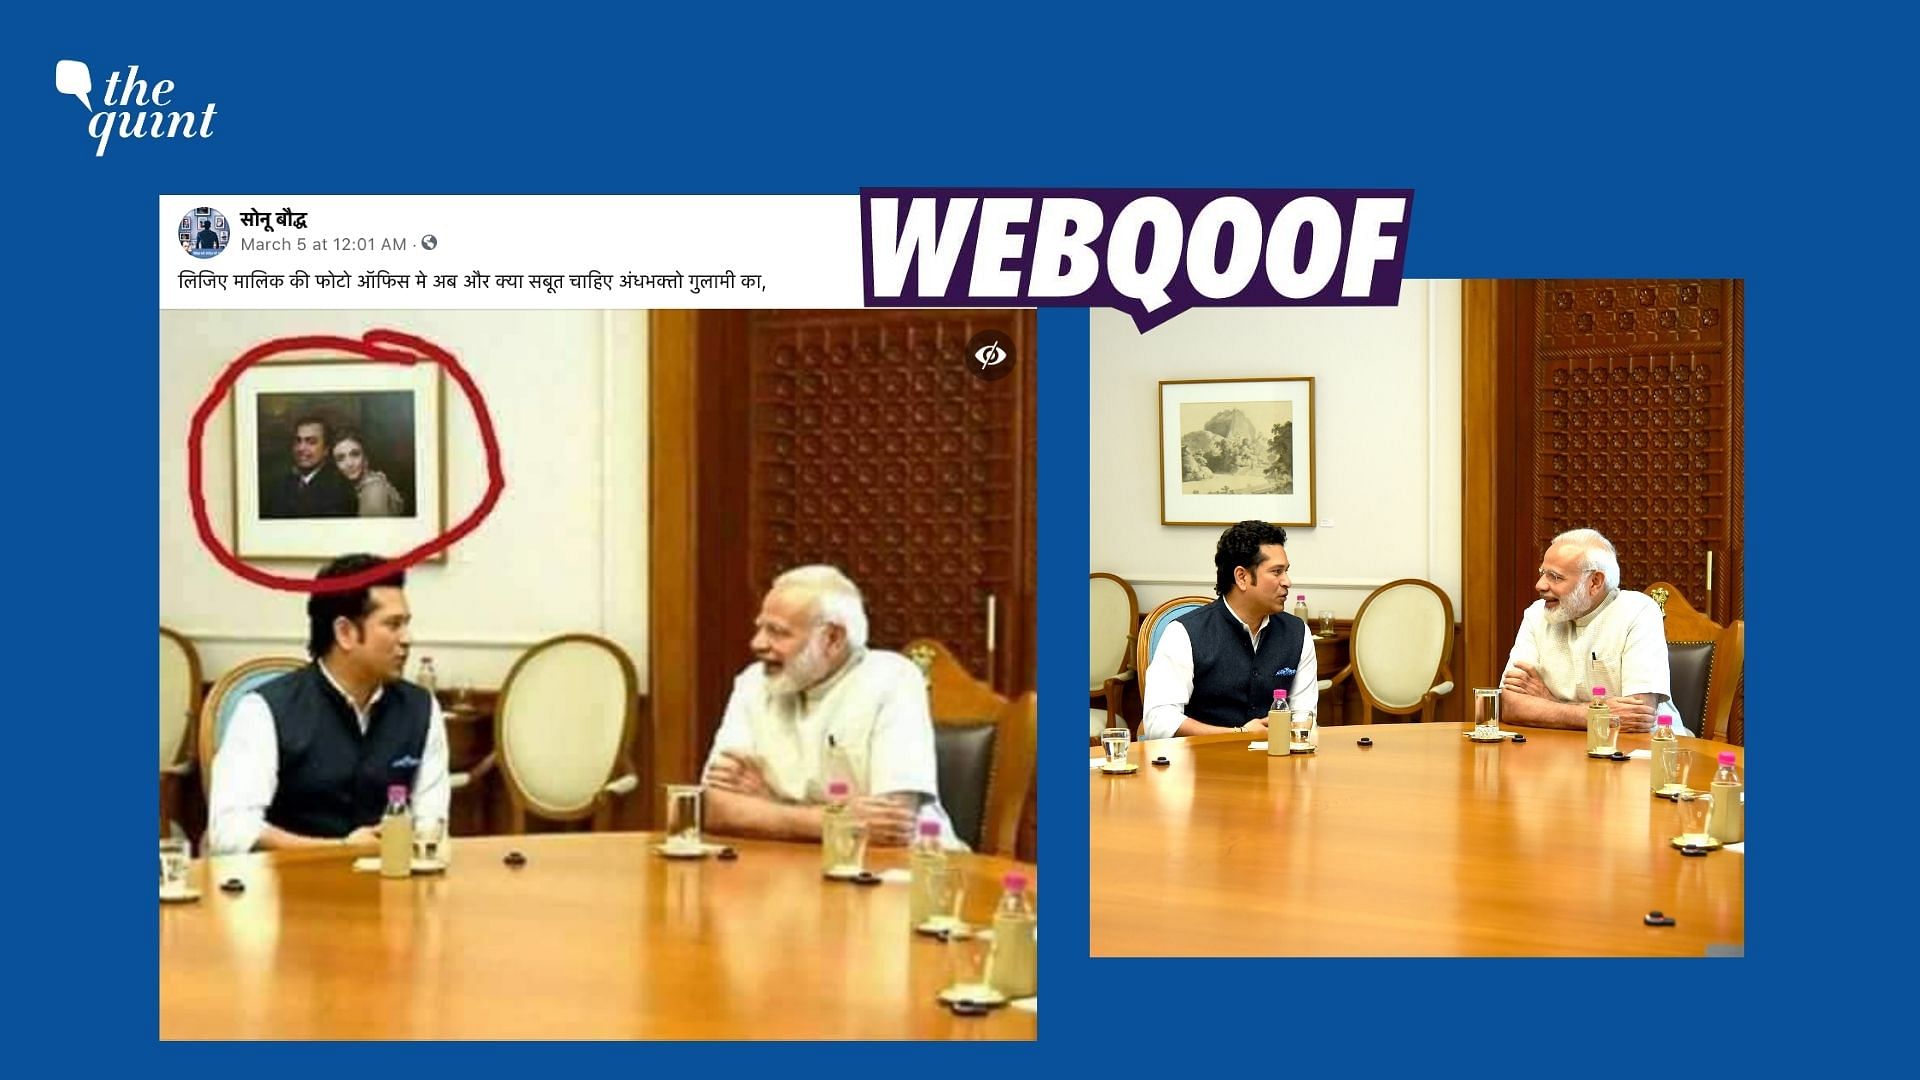 An old image of PM Narendra Modi meeting cricketer Sachin Tendulkar was morphed to share the false claim that Ambanis’ photo is on the wall of PM’s office.